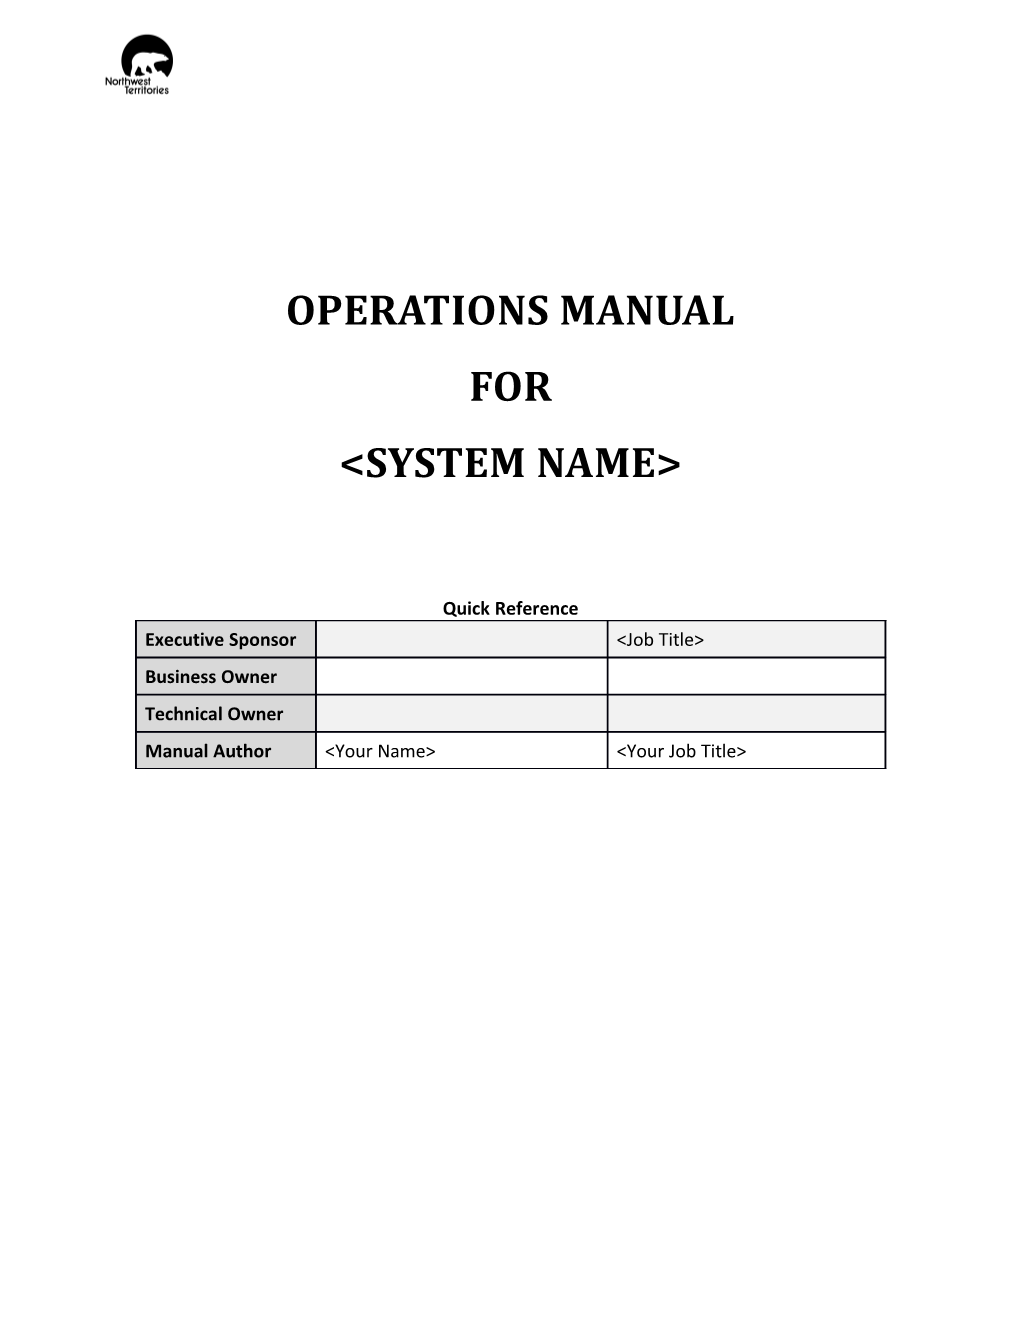 OPERATIONS MANUAL for &lt;SYSTEM NAME&gt;